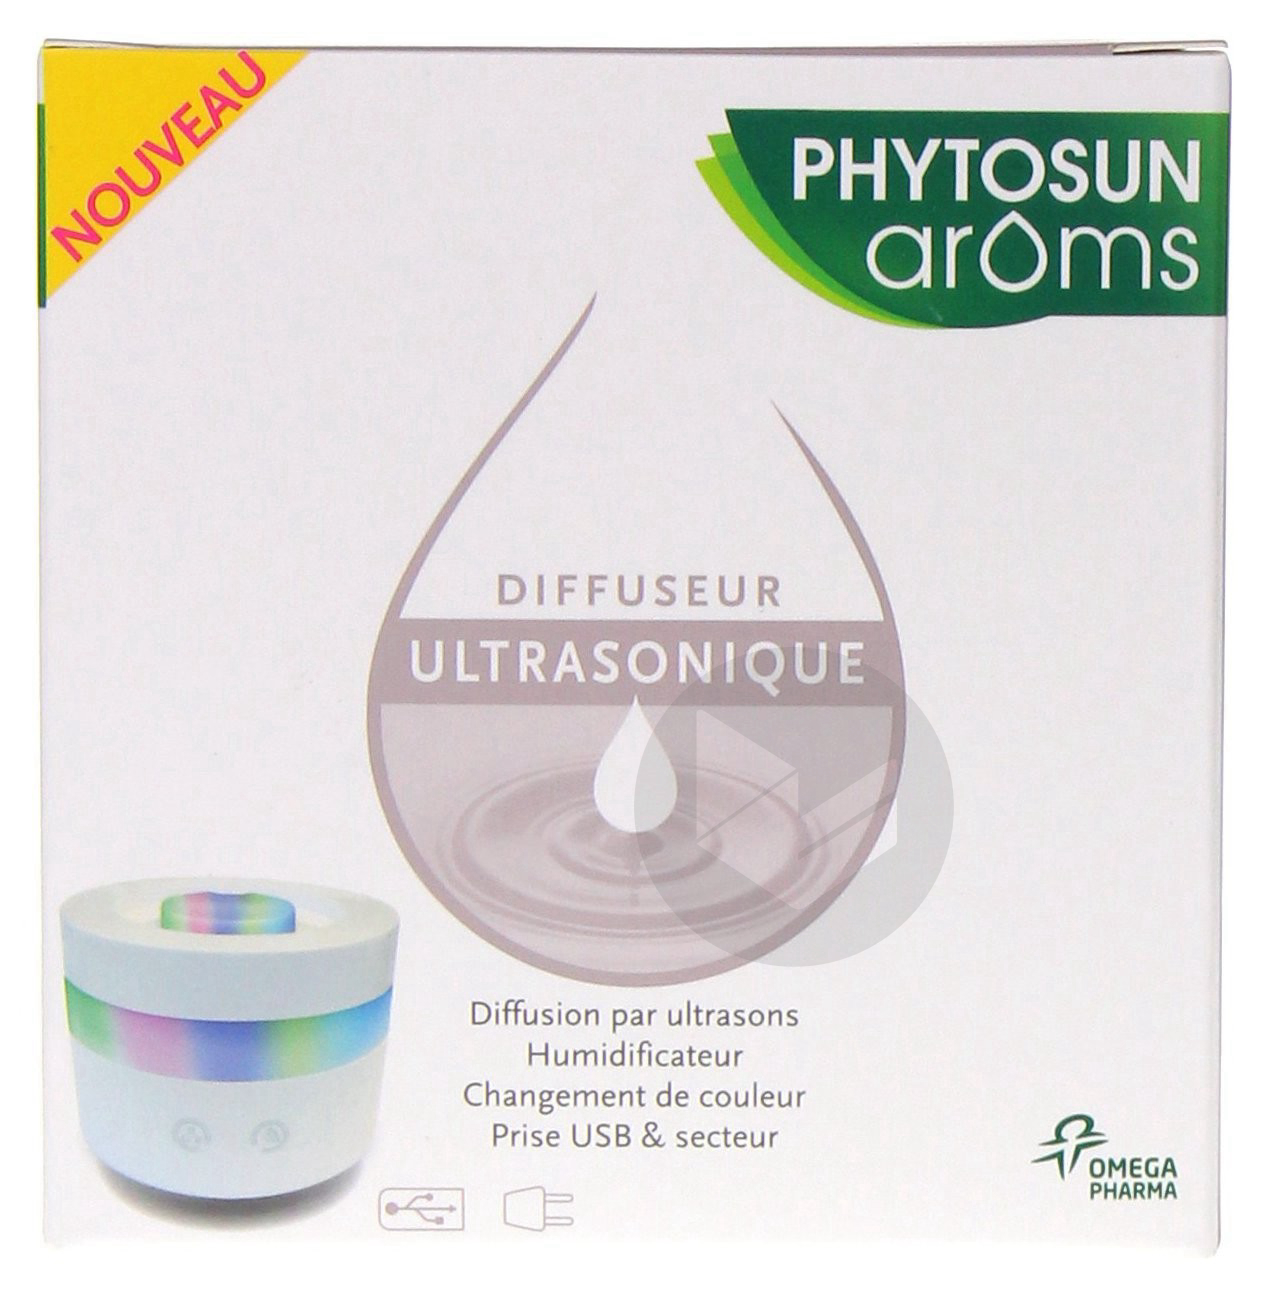 PHYTOSUN AROMS Diffuseur ultrasonique cylindrique